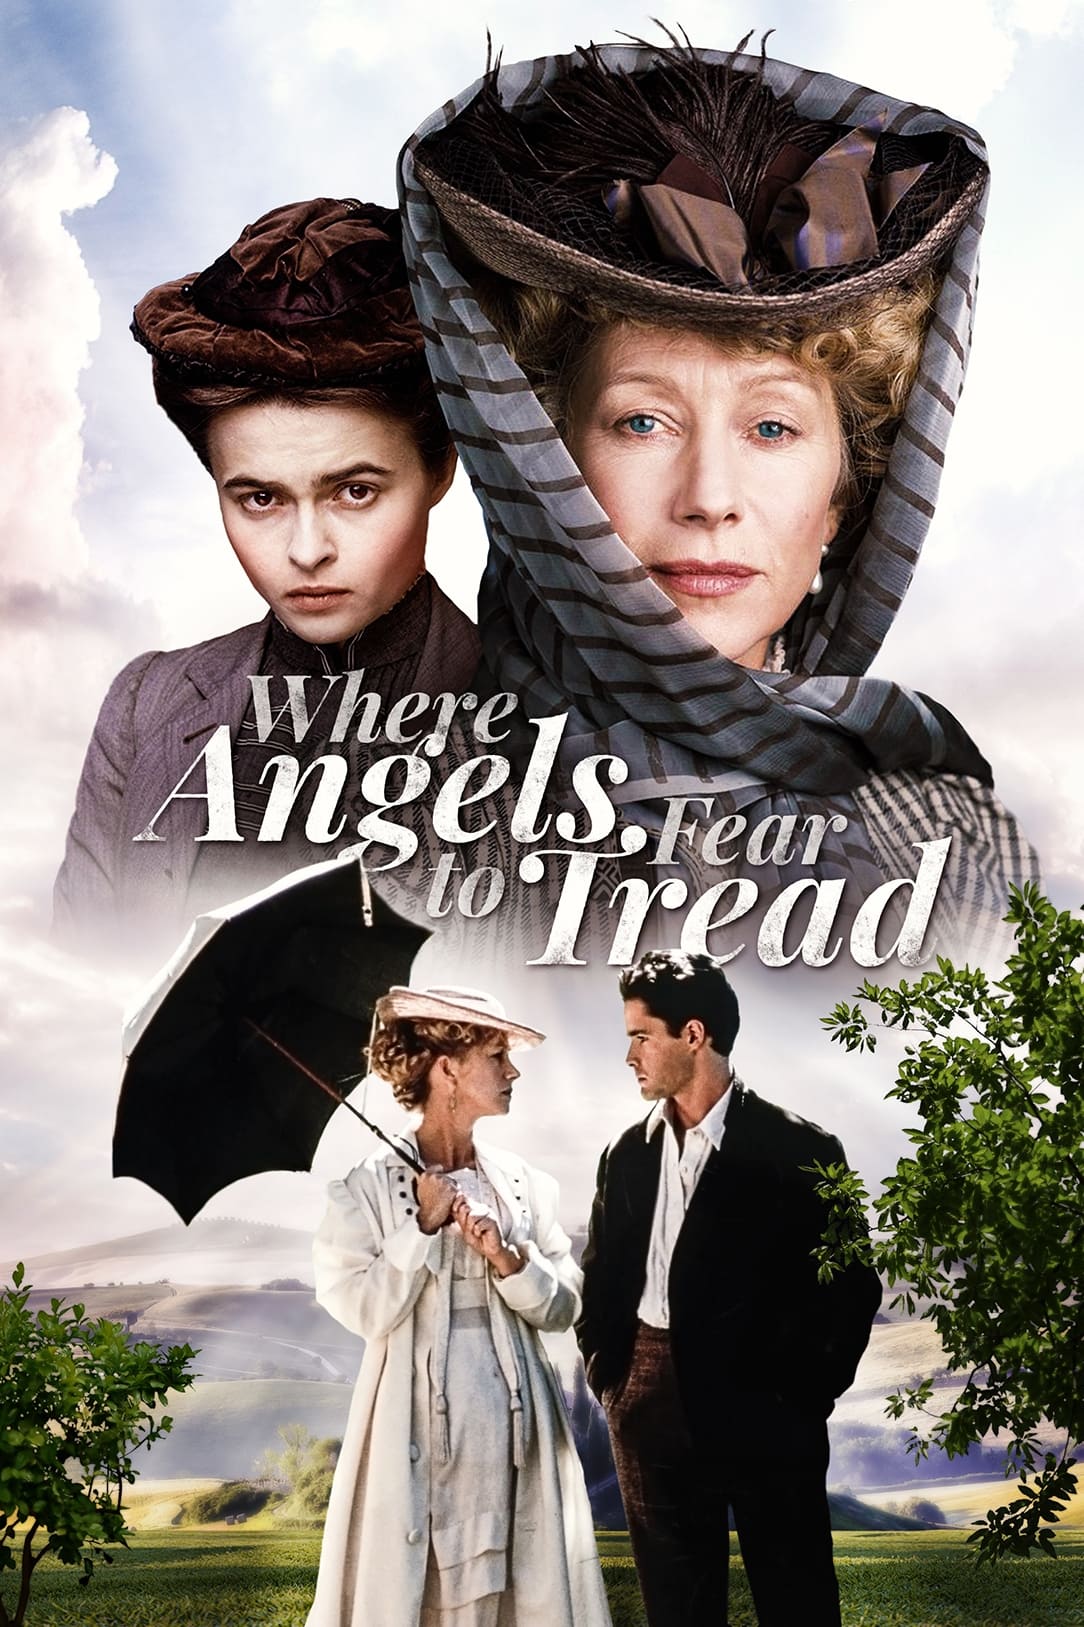 Where Angels Fear to Tread (1991)